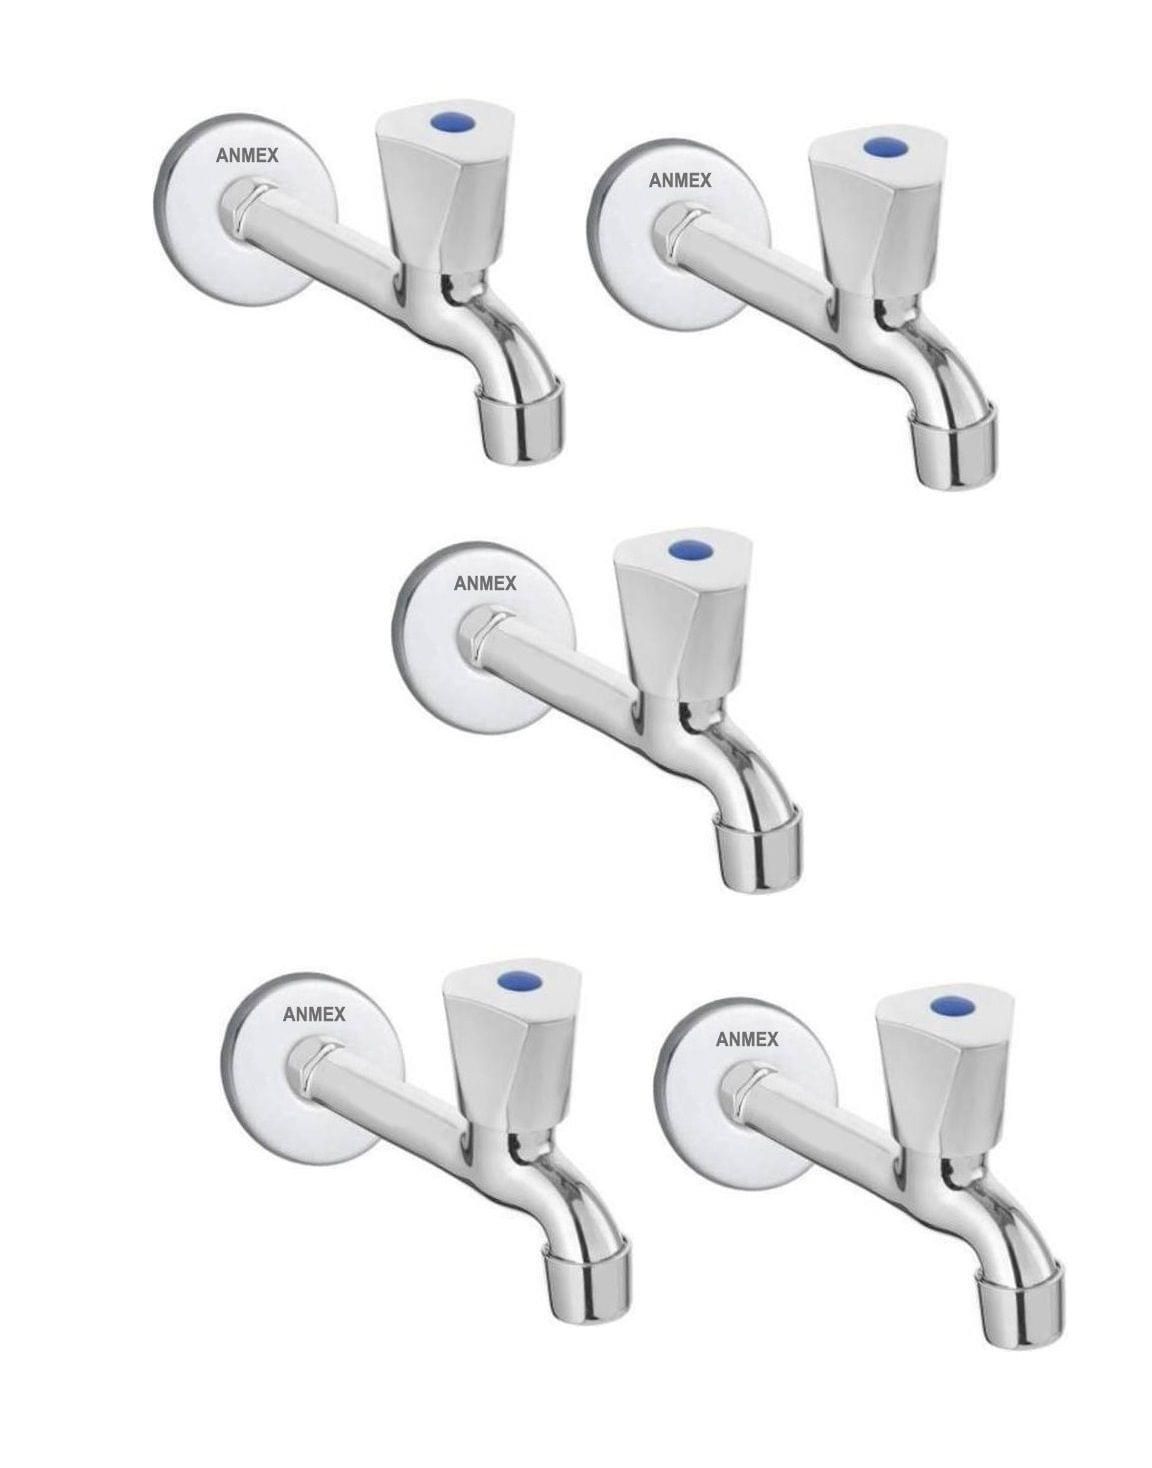 ANMEX SS ACURA Long body Tap for Kitchen and Bathroom SS Chrome Finish With Wall Flange Set of 5